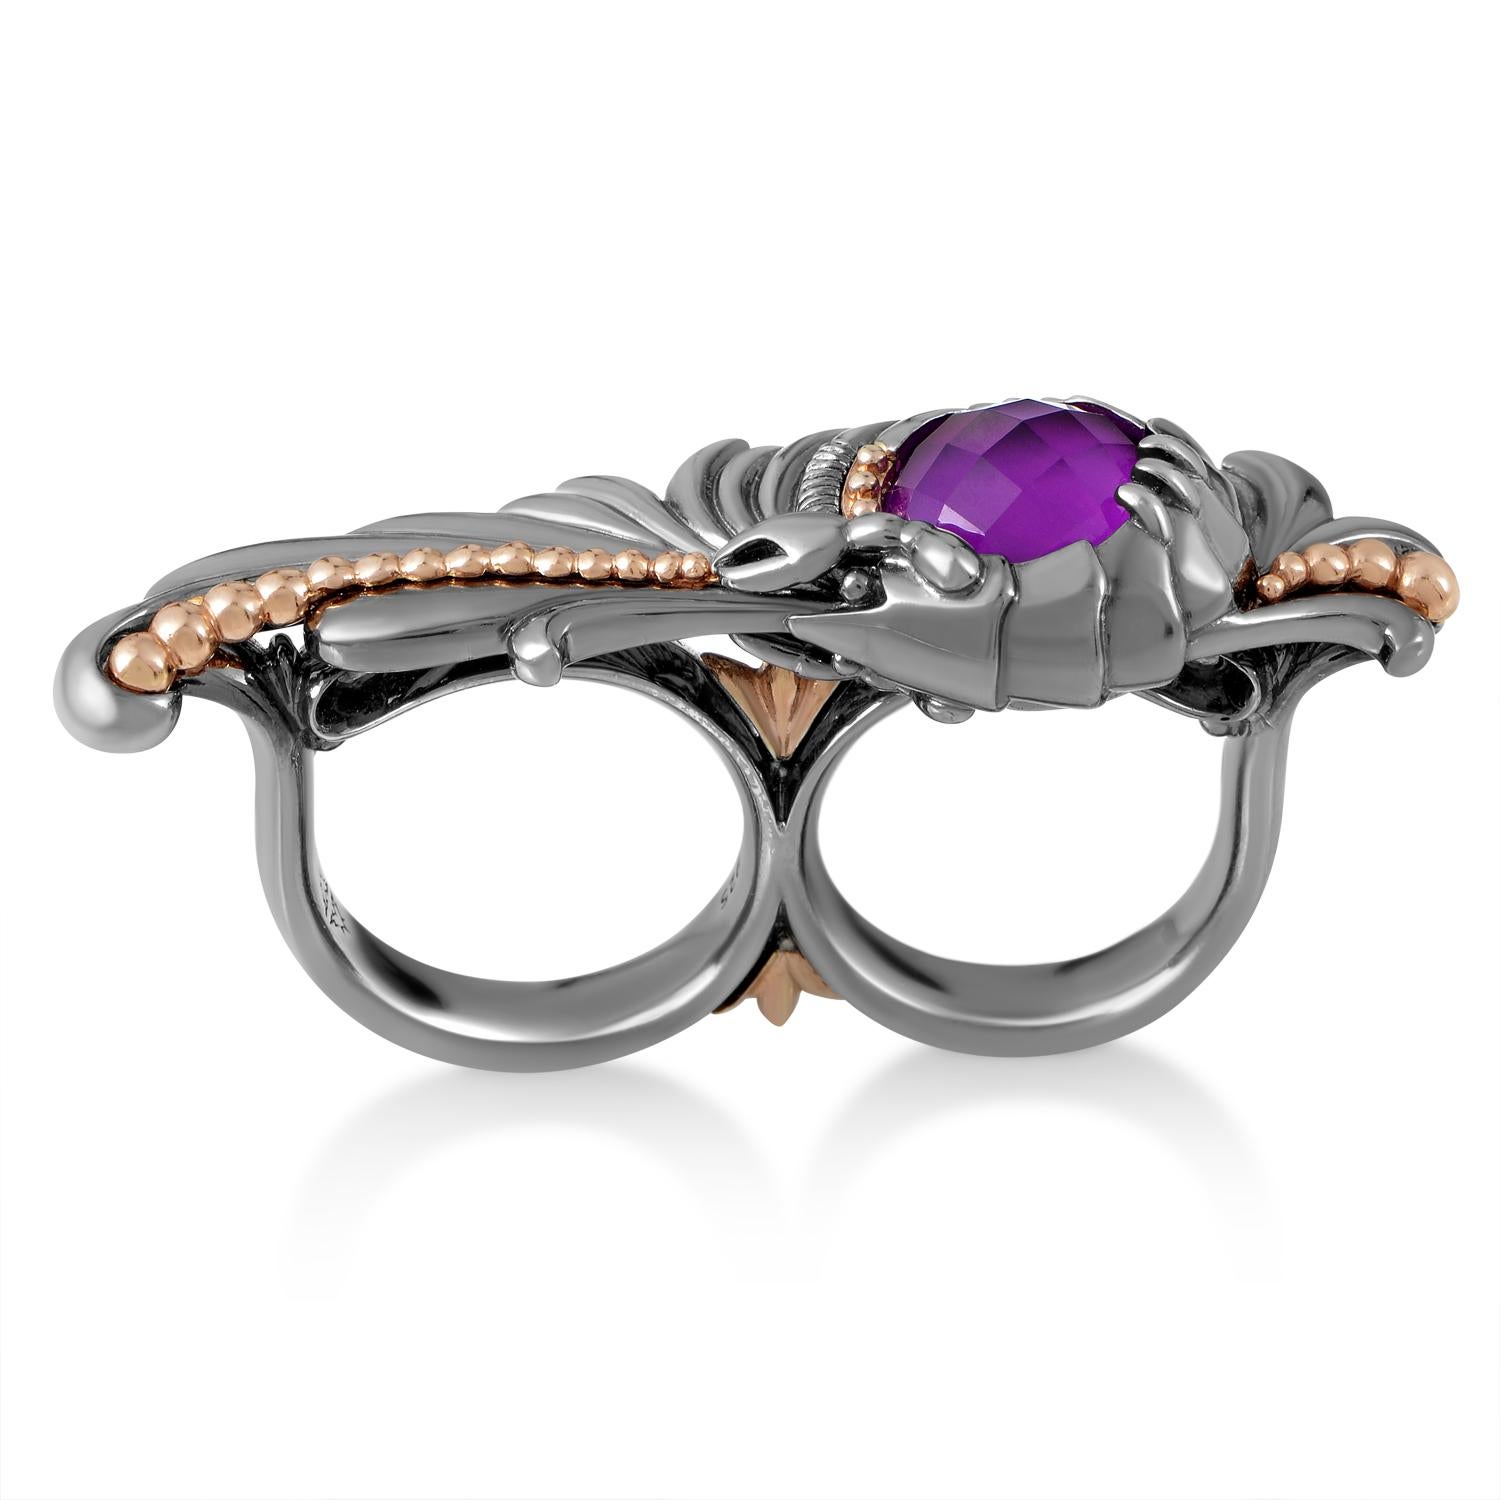 Bold and beautiful are the perfect words to describe this stunning ring from Stephen Webster's 'Jewels Verne' collection. The remarkable ring is made primarily of rhodium-treated sterling silver with rose gold plating. The ring's main attraction